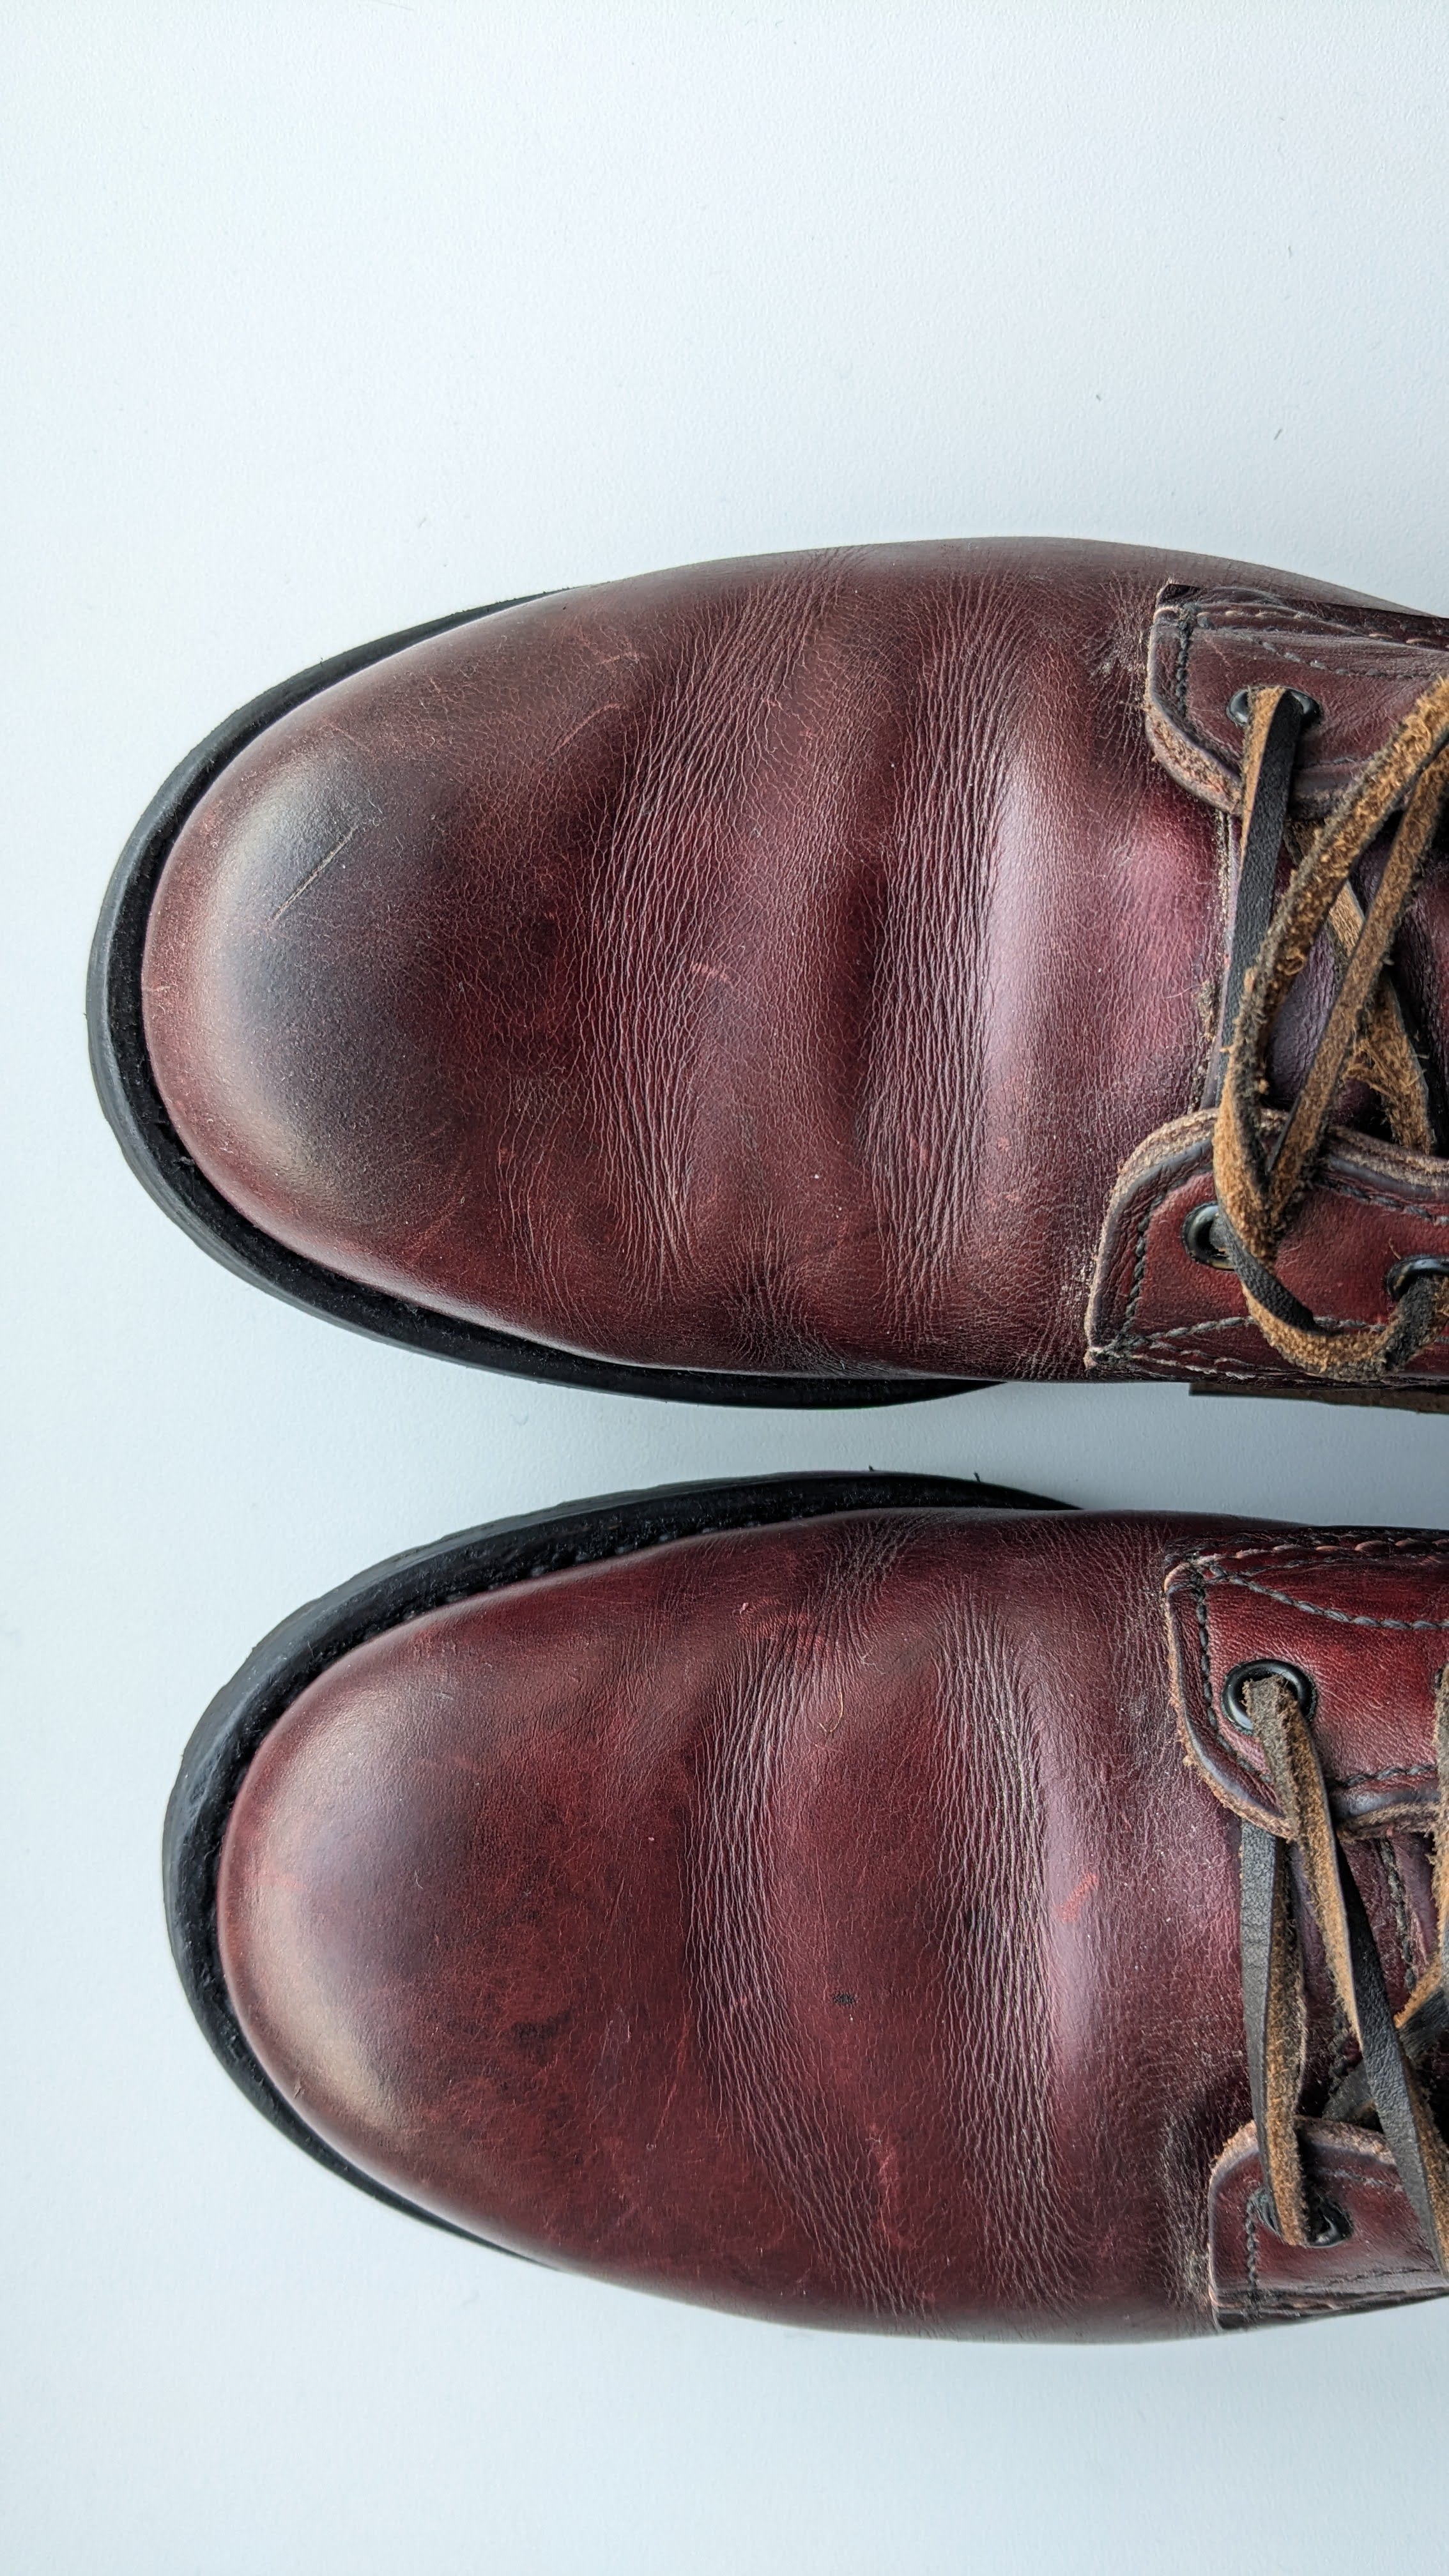 Red Wing 9011 / US 8.5D / EU 41.5 / UK7.5 / Fully resoled | The